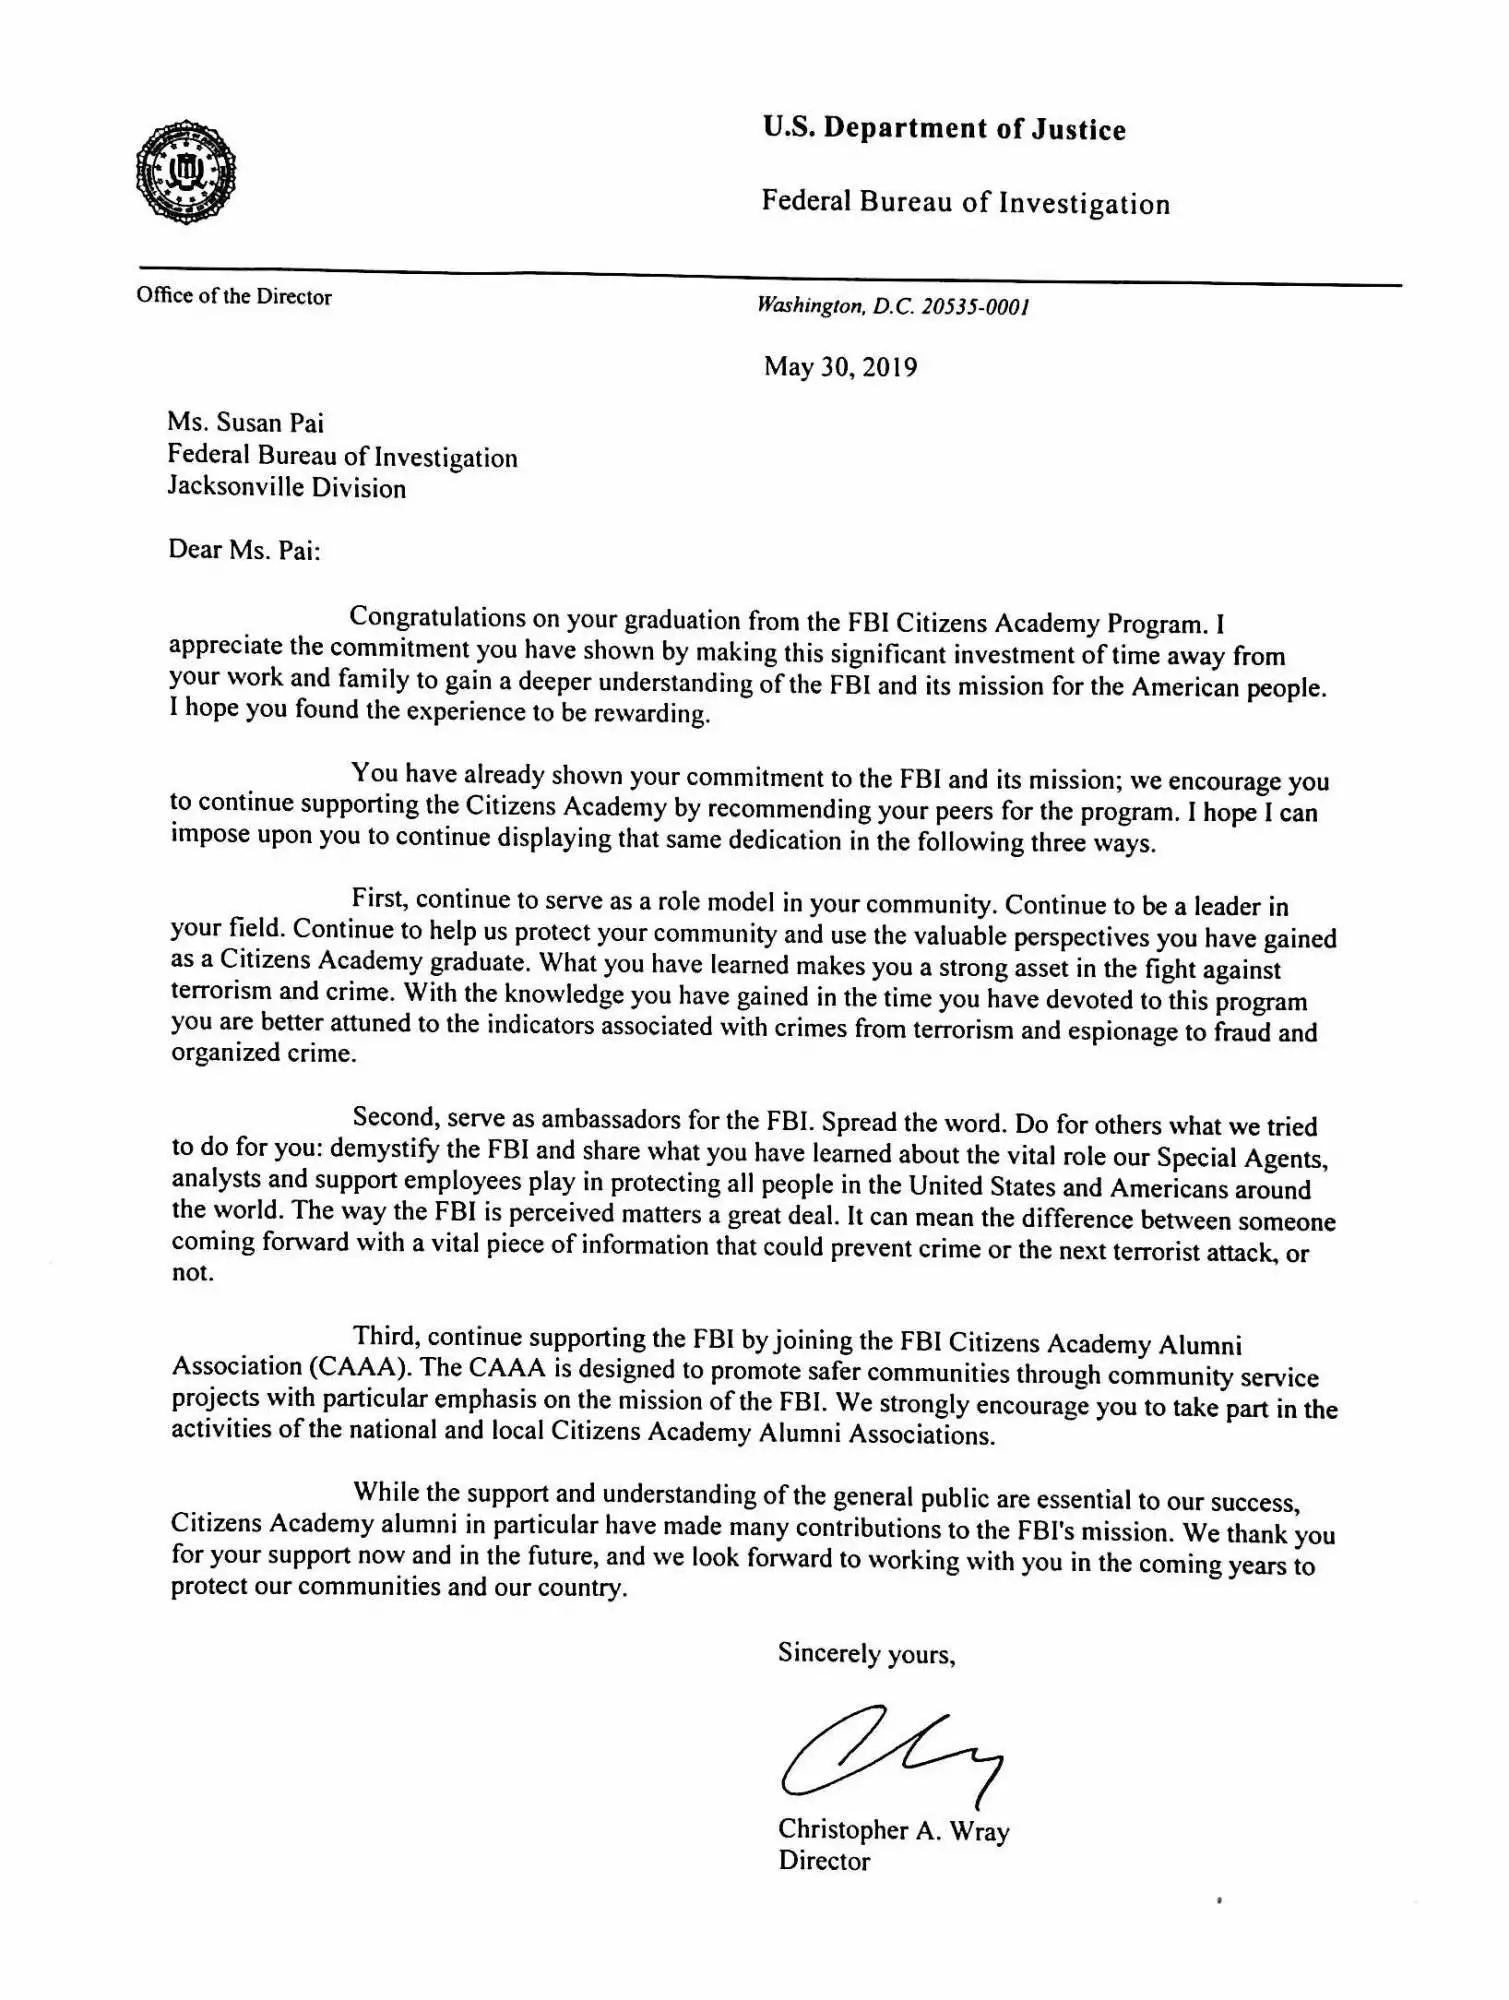 Letter from FBI Director Christopher Wray